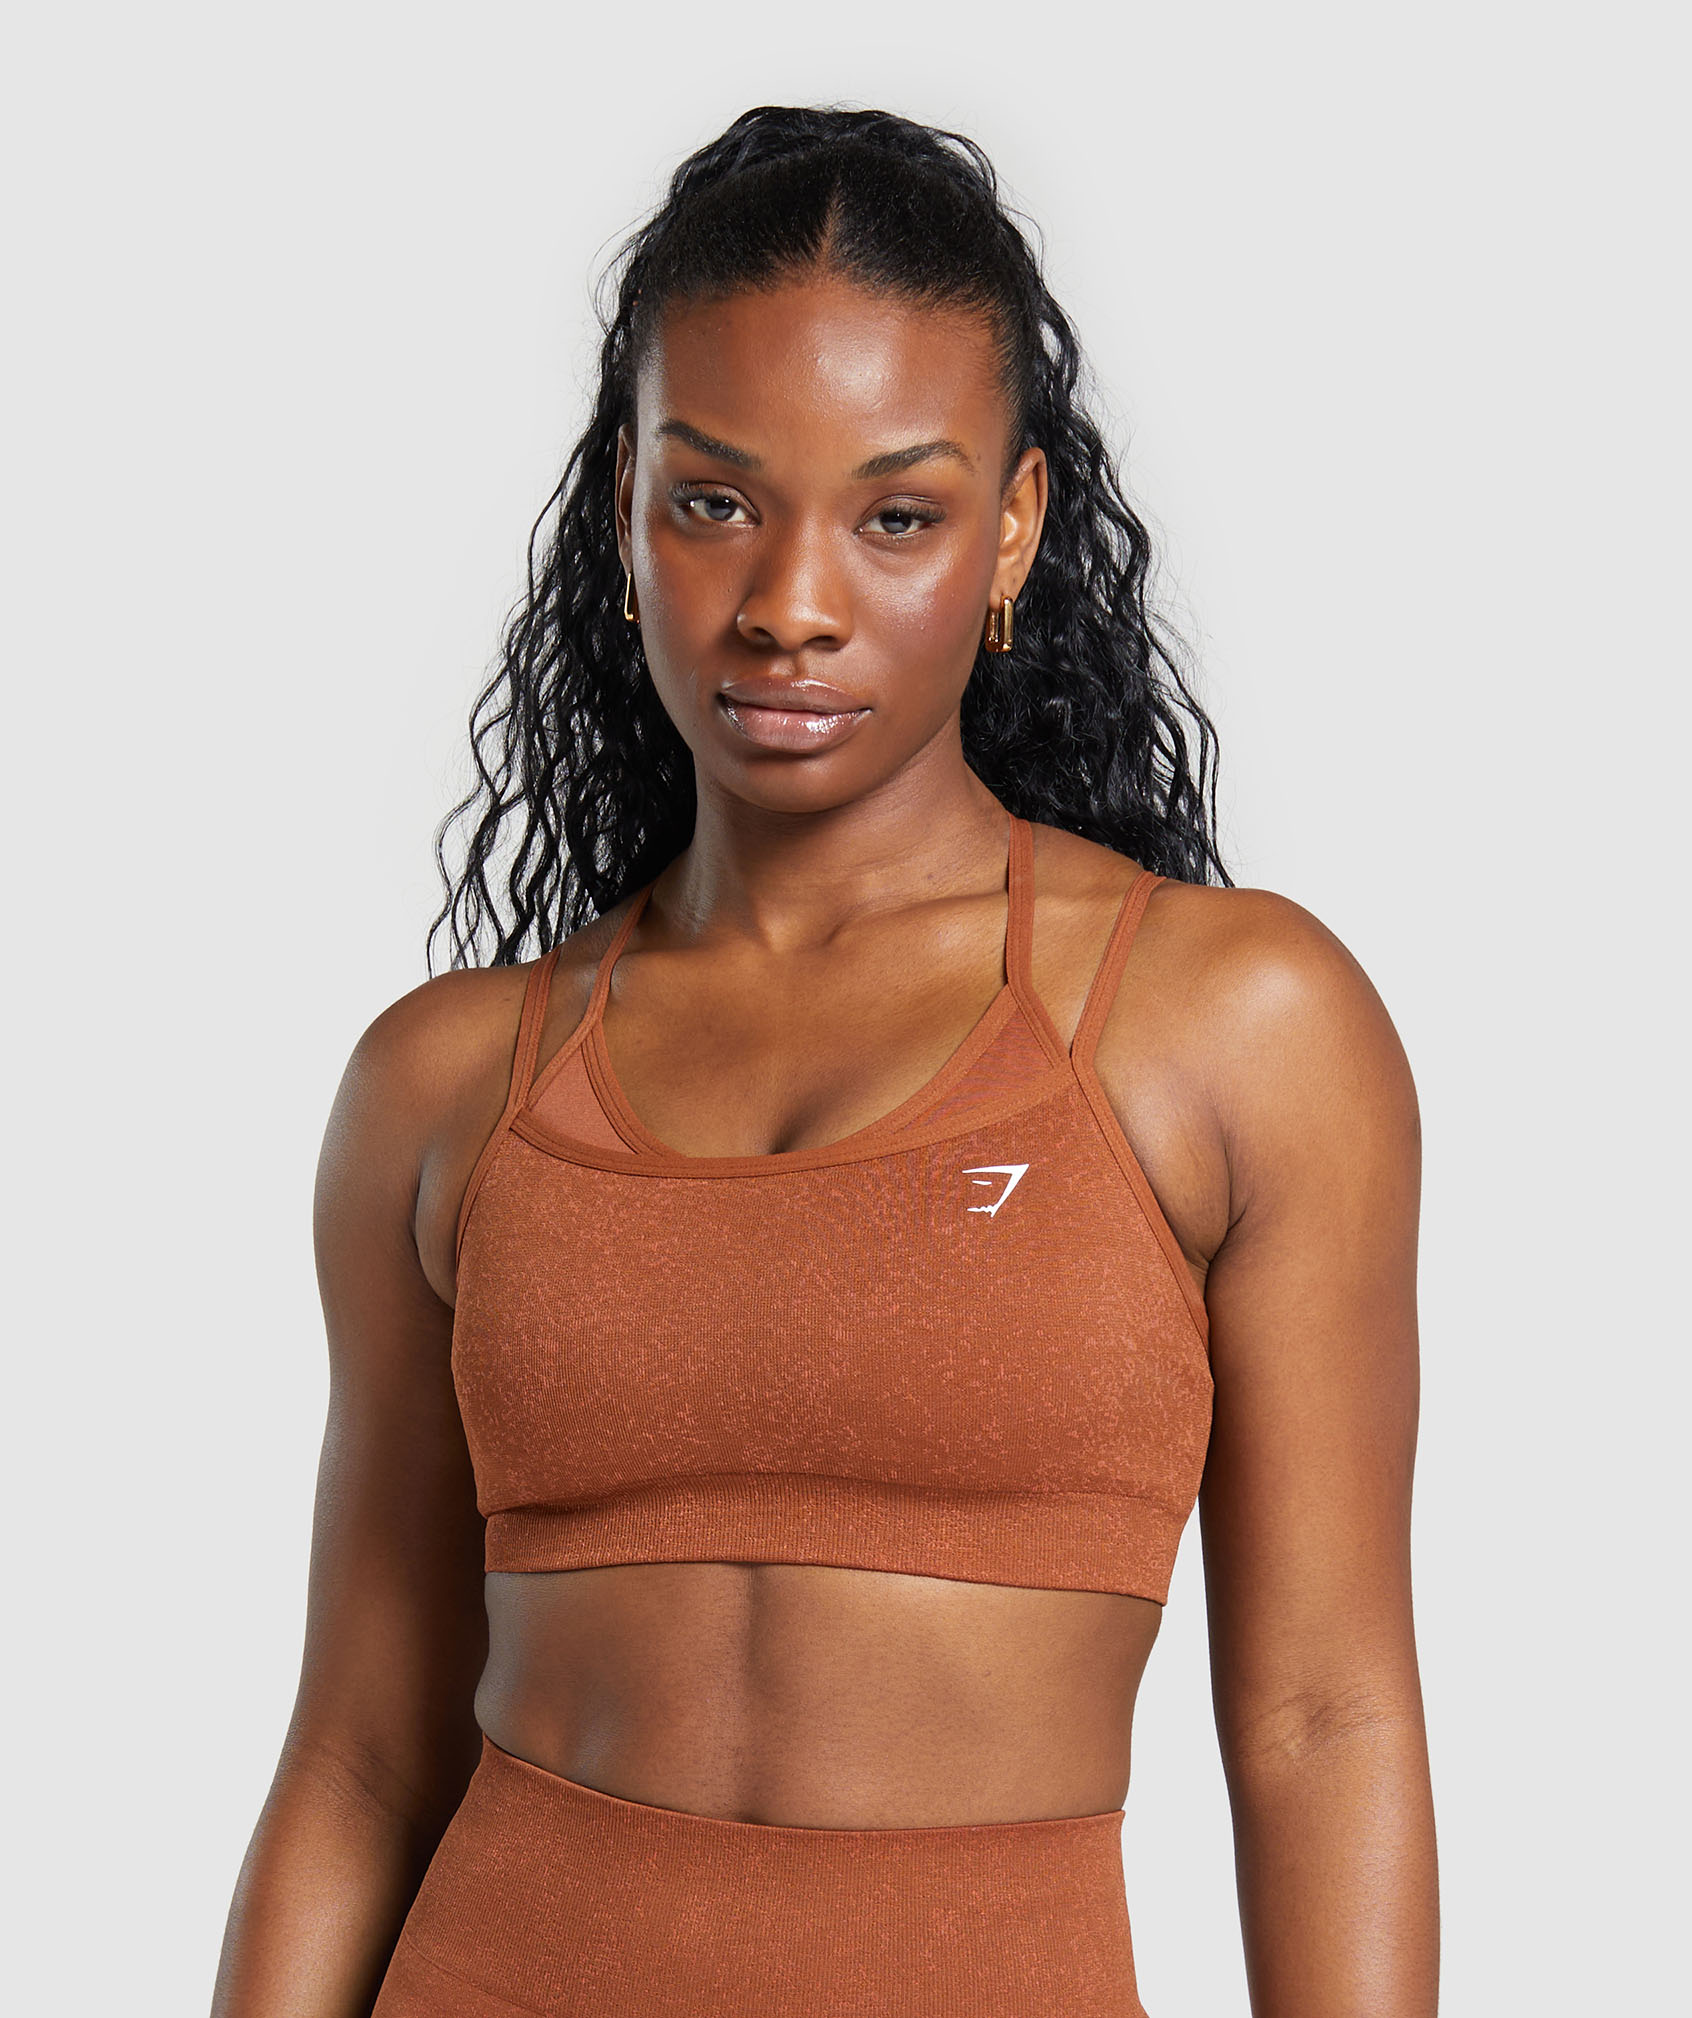 Types Of Sports Bras - How To Find The Right Support Level For You